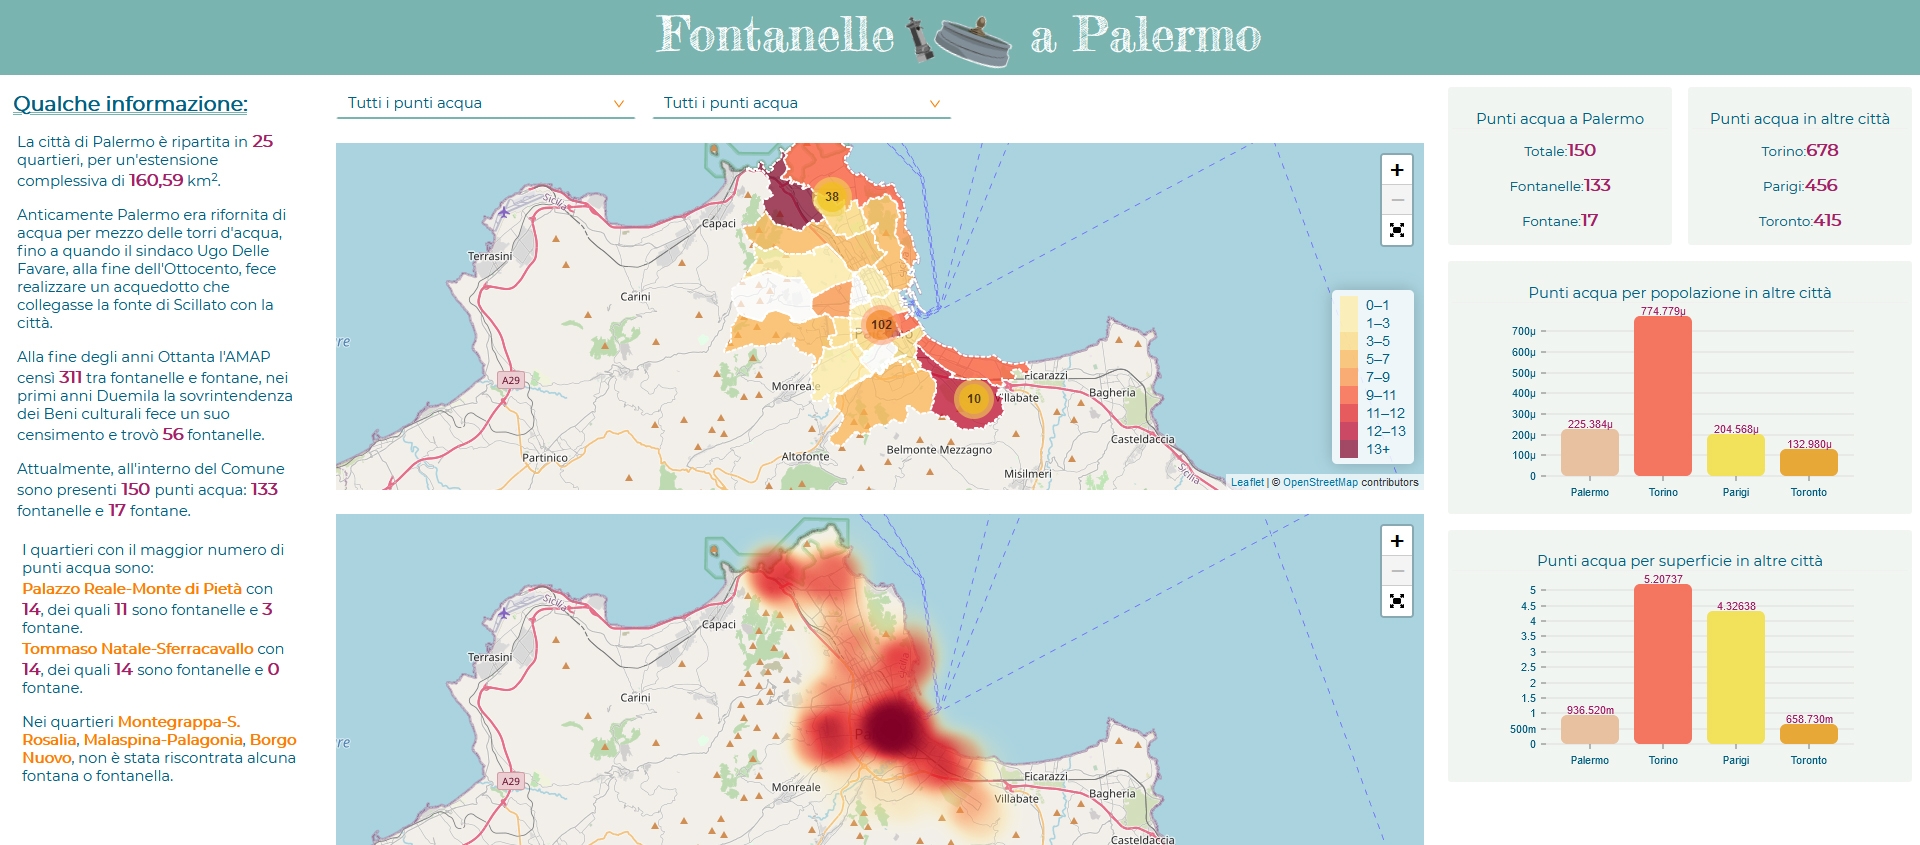 choropleth map about palermo fountains and column chart